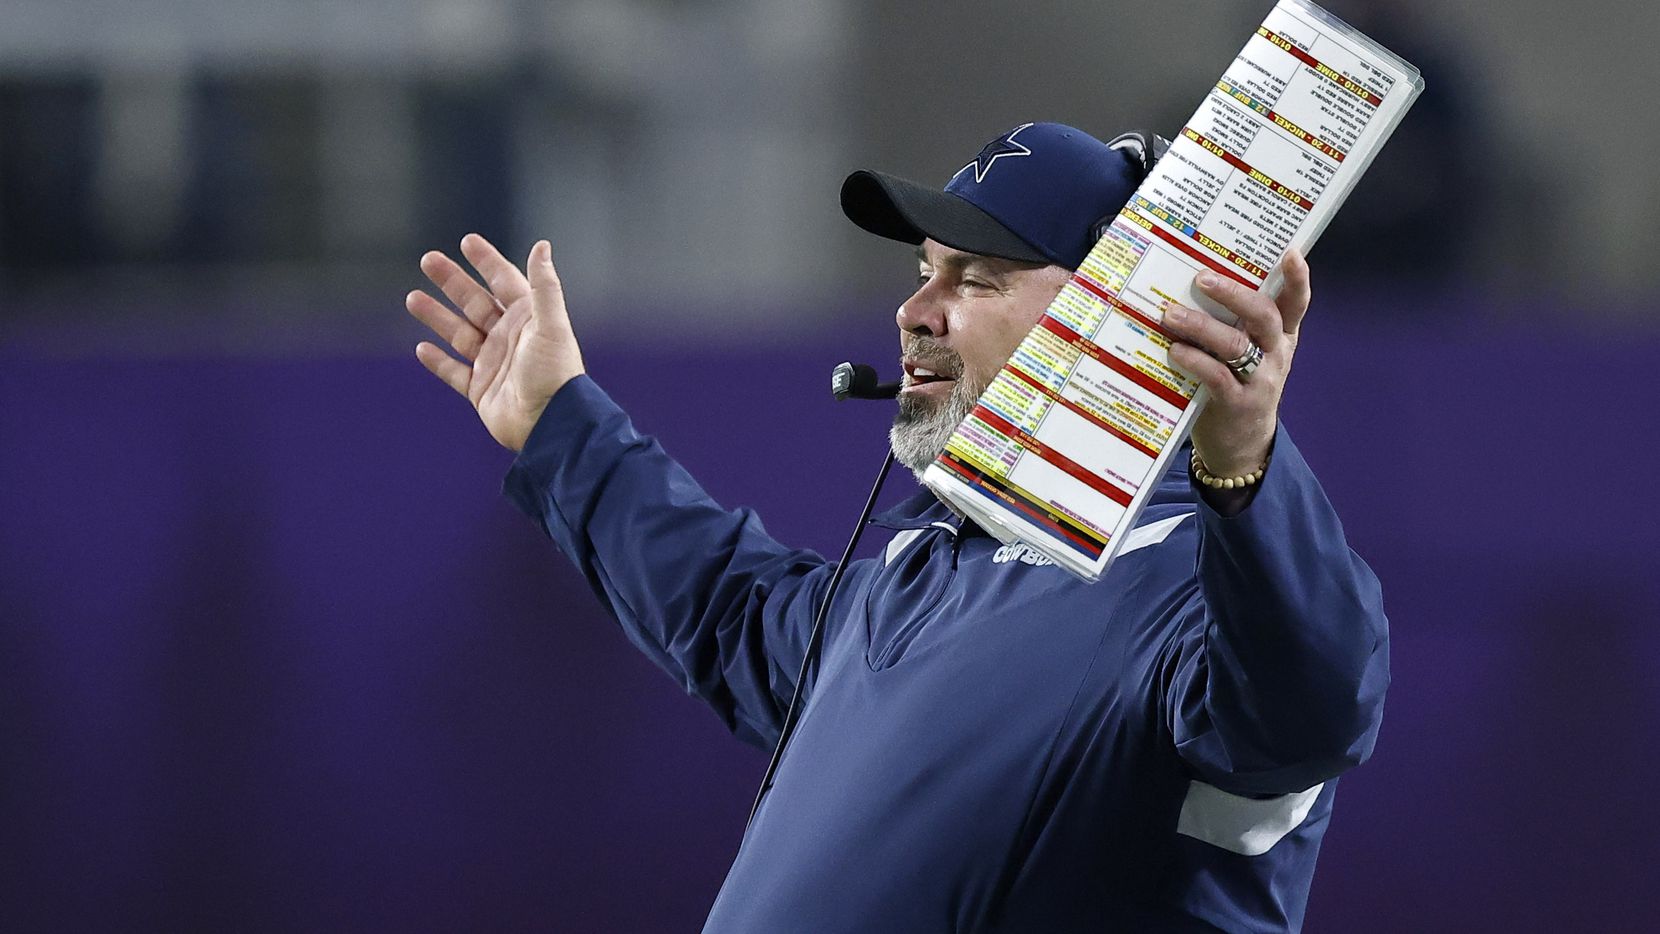 Dallas Cowboys head coach Mike McCarthy shows his disgust following a fourth quarter penalty call during their game against the Minnesota Vikings at U.S. Bank Stadium in Minneapolis, Minnesota, Sunday, October 31, 2021.